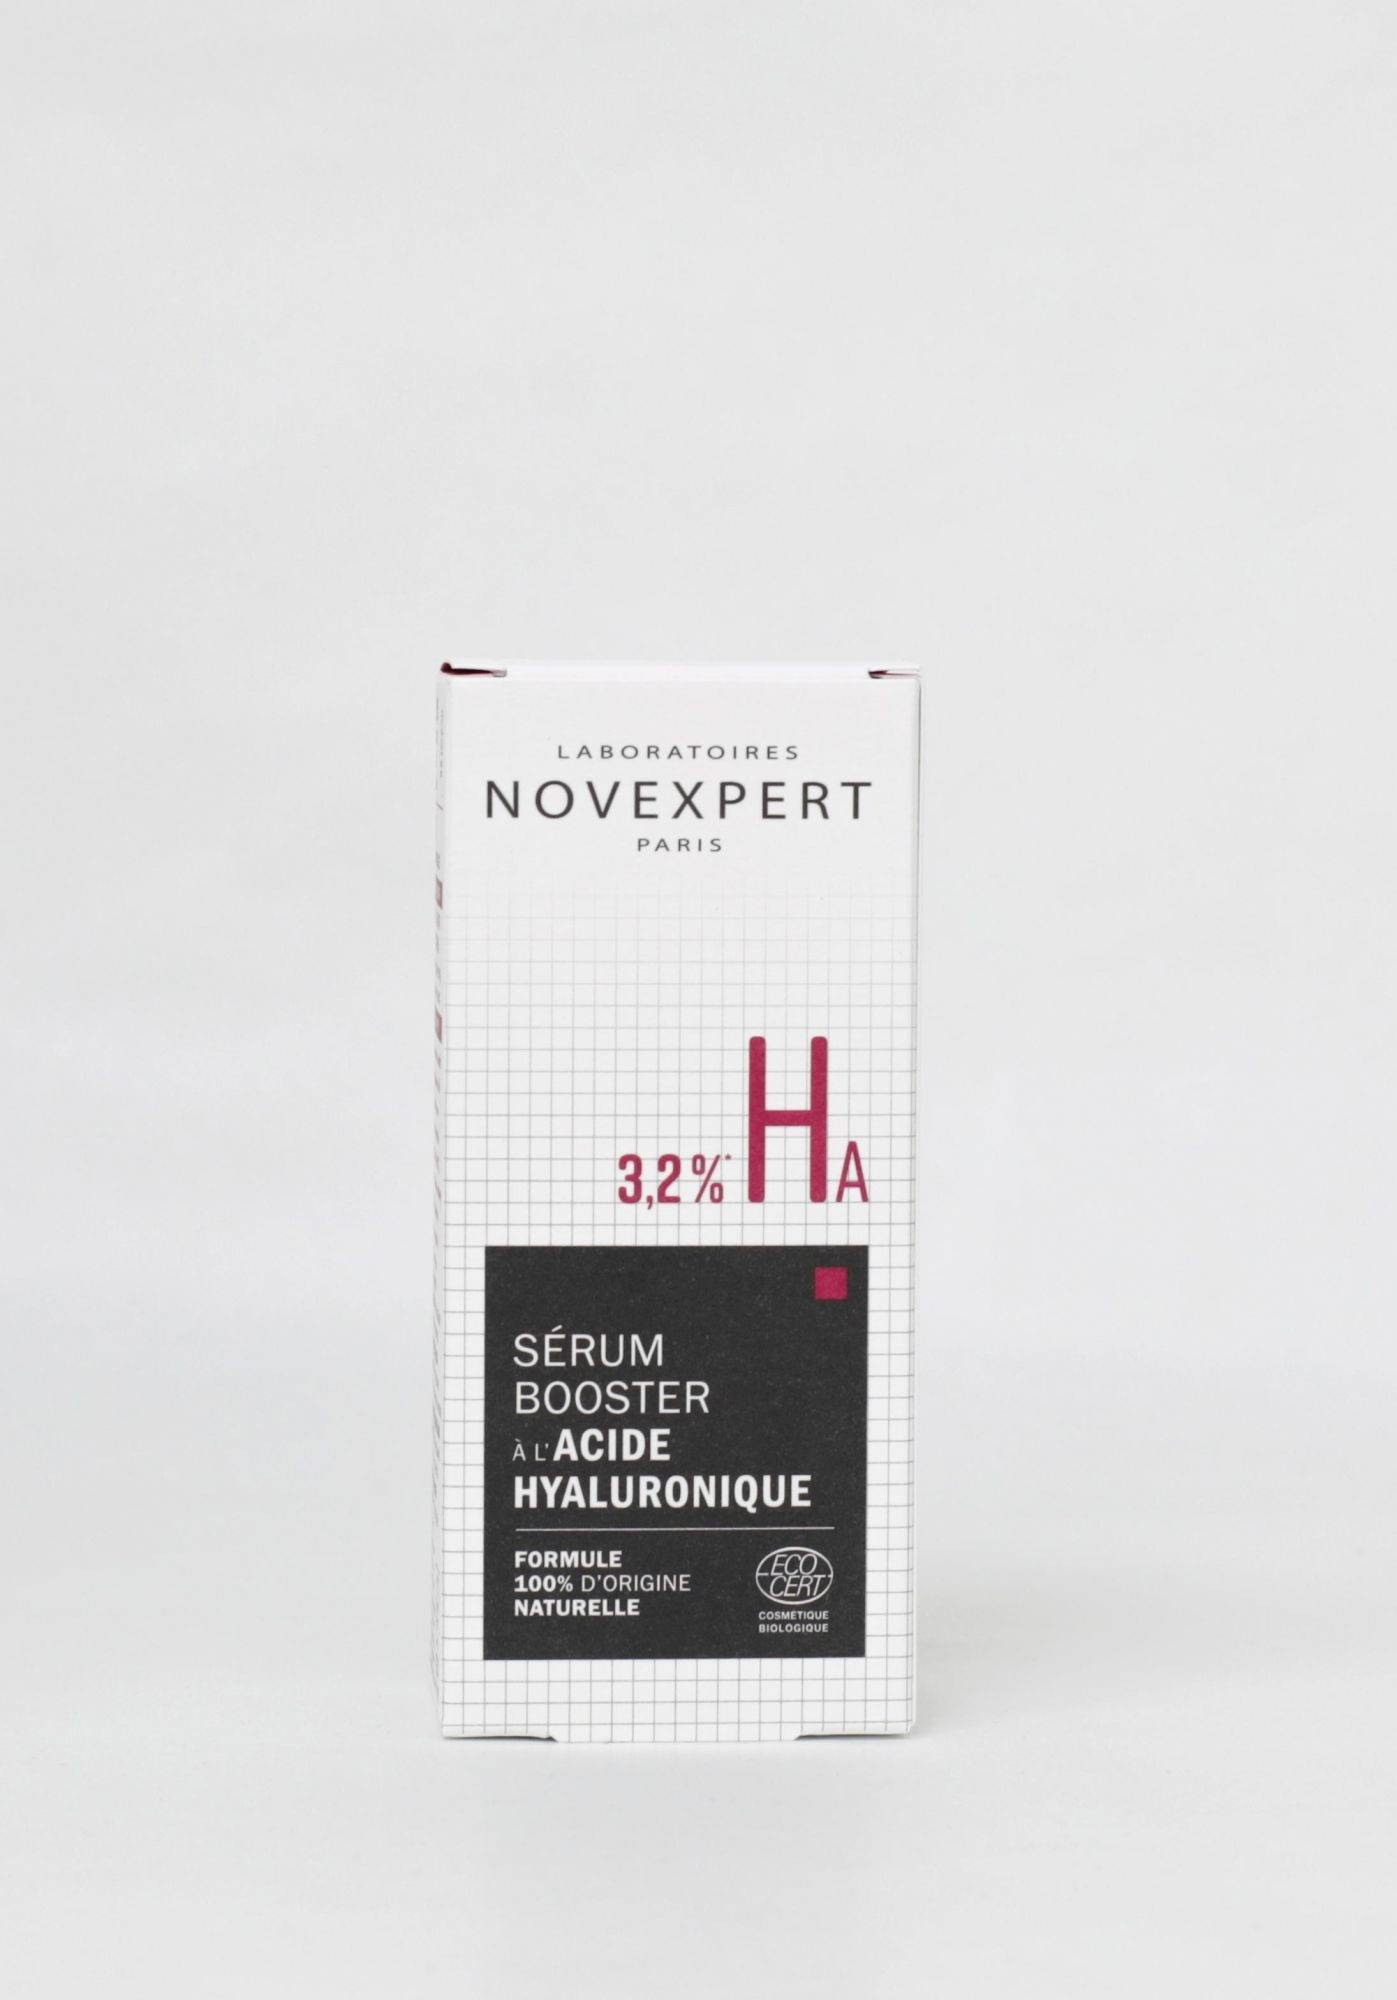 BOOSTER SERUM WITH HYALURONIC ACID